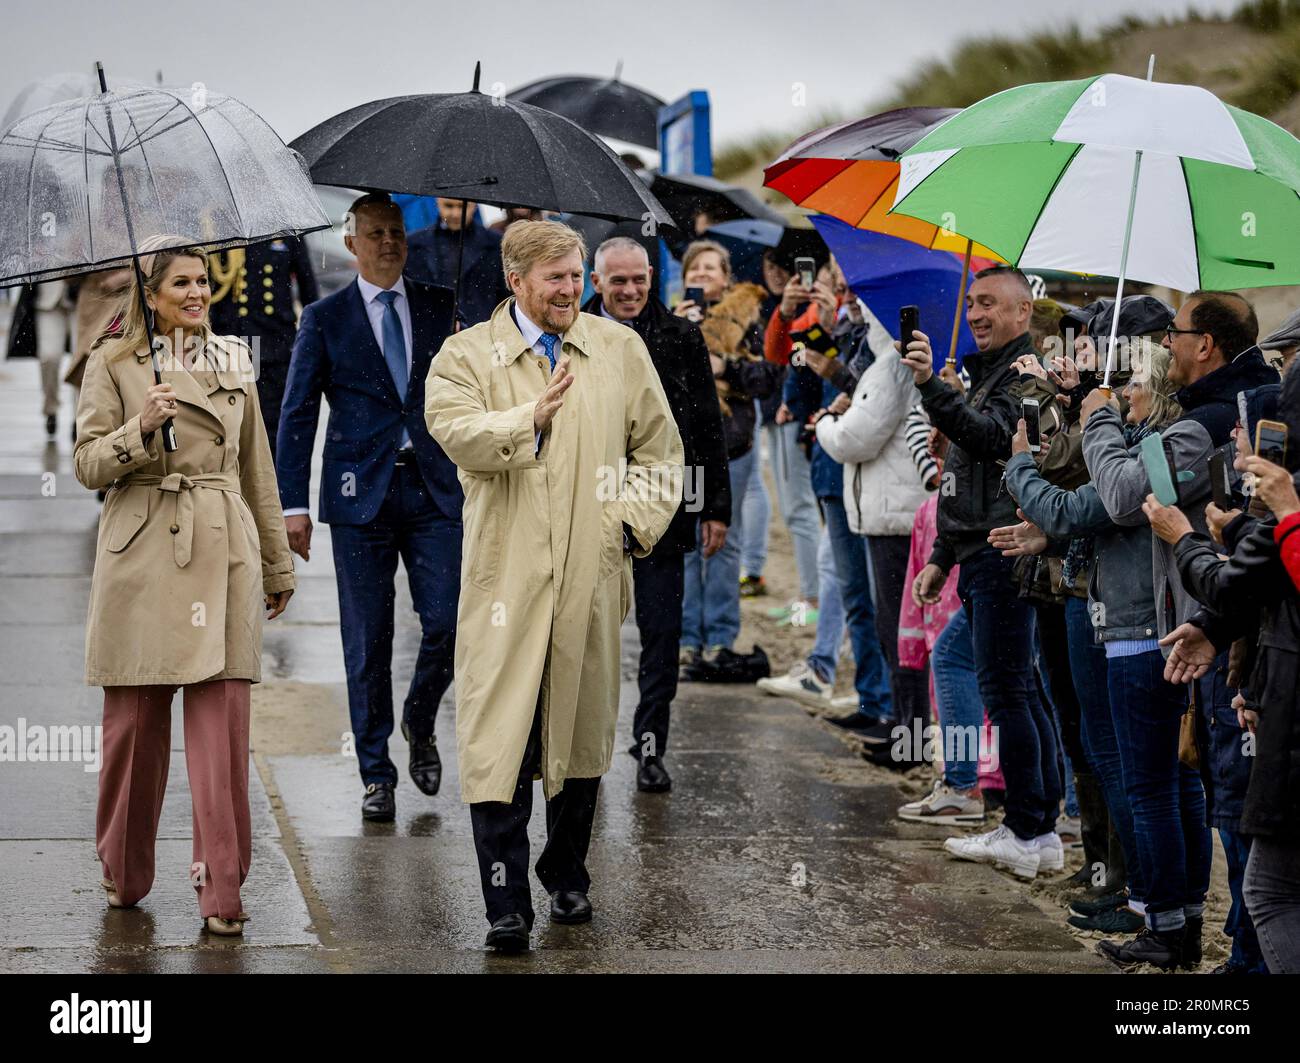 DEN HOORN - King Willem-Alexander and Queen Maxima arrive at Beach Pavilion Paal 9. The royal couple is paying a two-day regional visit to the Wadden Islands. ANP SEM VAN DER WAL netherlands out - belgium out Credit: ANP/Alamy Live News Stock Photo